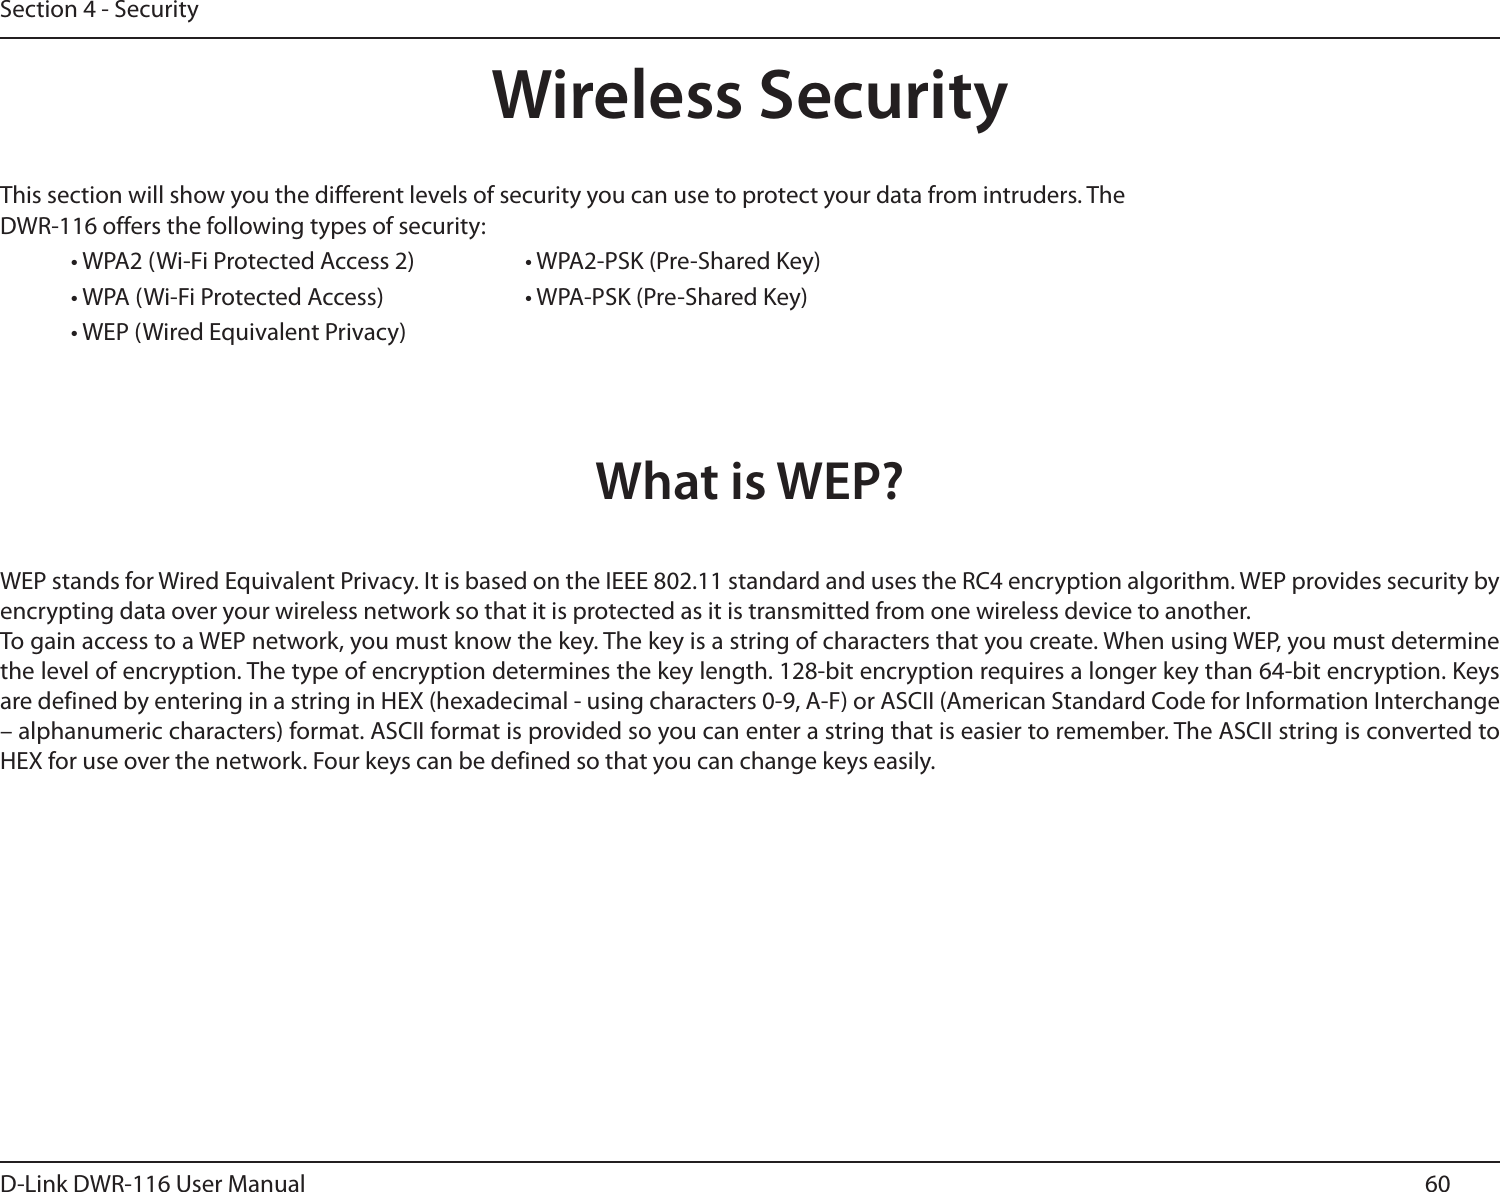 60D-Link DWR-116 User ManualSection 4 - SecurityWireless SecurityThis section will show you the different levels of security you can use to protect your data from intruders. The DWR-116 offers the following types of security:• WPA2 (Wi-Fi Protected Access 2)     • WPA2-PSK (Pre-Shared Key)• WPA (Wi-Fi Protected Access)    • WPA-PSK (Pre-Shared Key)• WEP (Wired Equivalent Privacy)What is WEP?WEP stands for Wired Equivalent Privacy. It is based on the IEEE 802.11 standard and uses the RC4 encryption algorithm. WEP provides security by encrypting data over your wireless network so that it is protected as it is transmitted from one wireless device to another.To gain access to a WEP network, you must know the key. The key is a string of characters that you create. When using WEP, you must determine the level of encryption. The type of encryption determines the key length. 128-bit encryption requires a longer key than 64-bit encryption. Keys are defined by entering in a string in HEX (hexadecimal - using characters 0-9, A-F) or ASCII (American Standard Code for Information Interchange – alphanumeric characters) format. ASCII format is provided so you can enter a string that is easier to remember. The ASCII string is converted to HEX for use over the network. Four keys can be defined so that you can change keys easily.